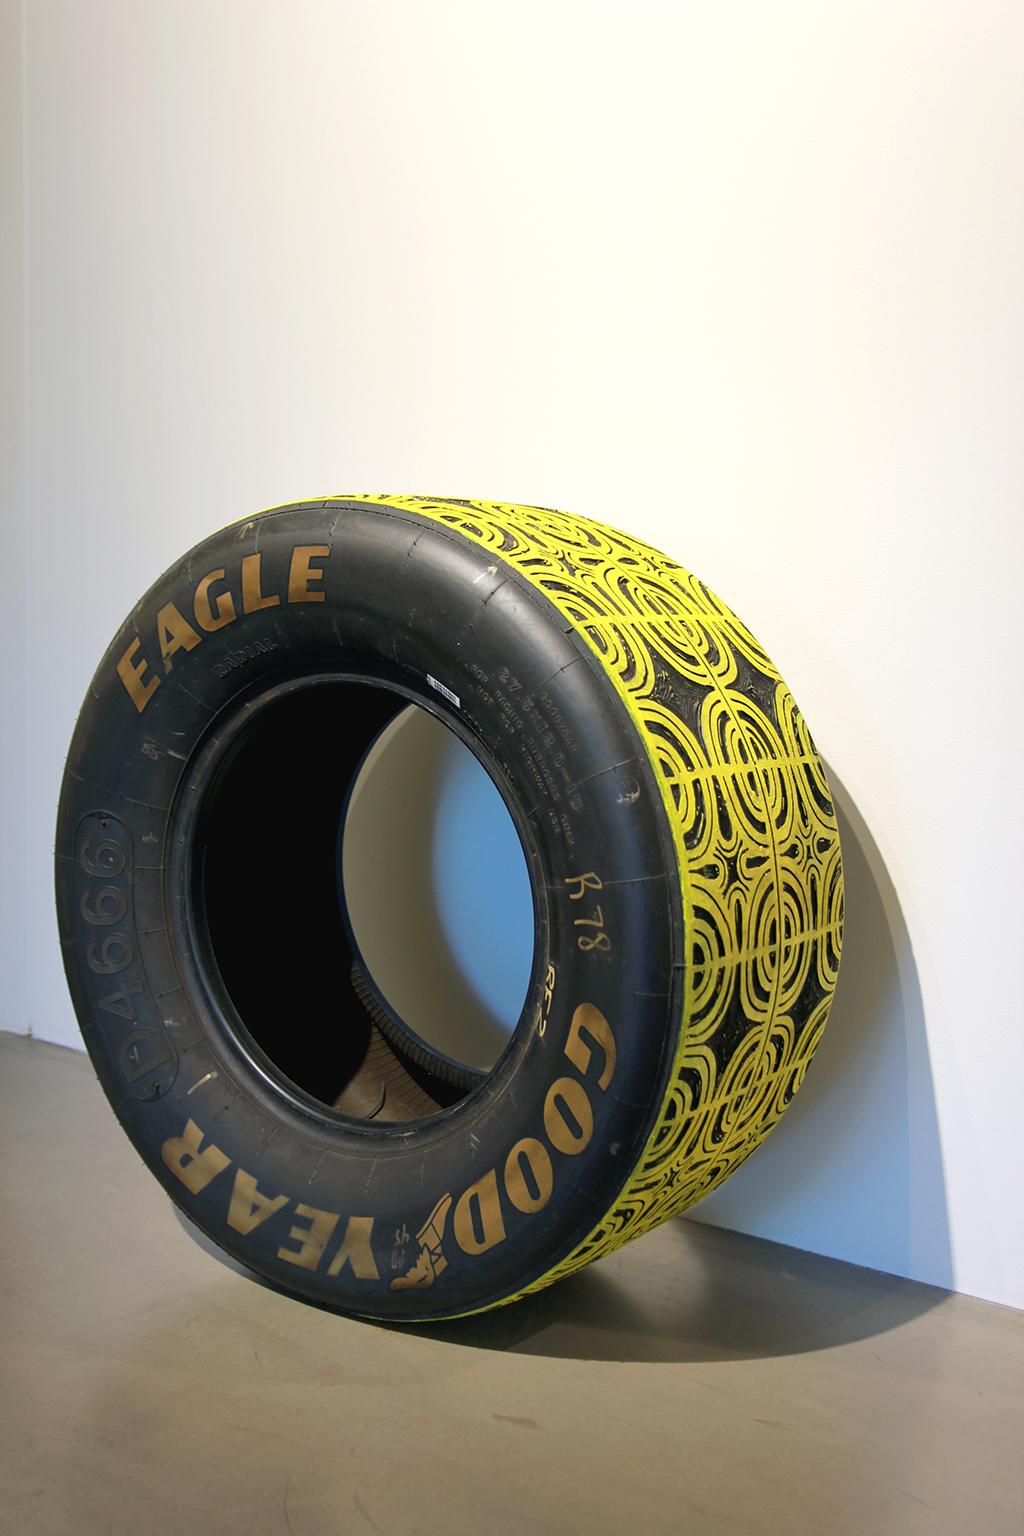 Sam Fresquez Abstract Sculpture - "Second Place is the First Loser" carved tire sculpture Nascar